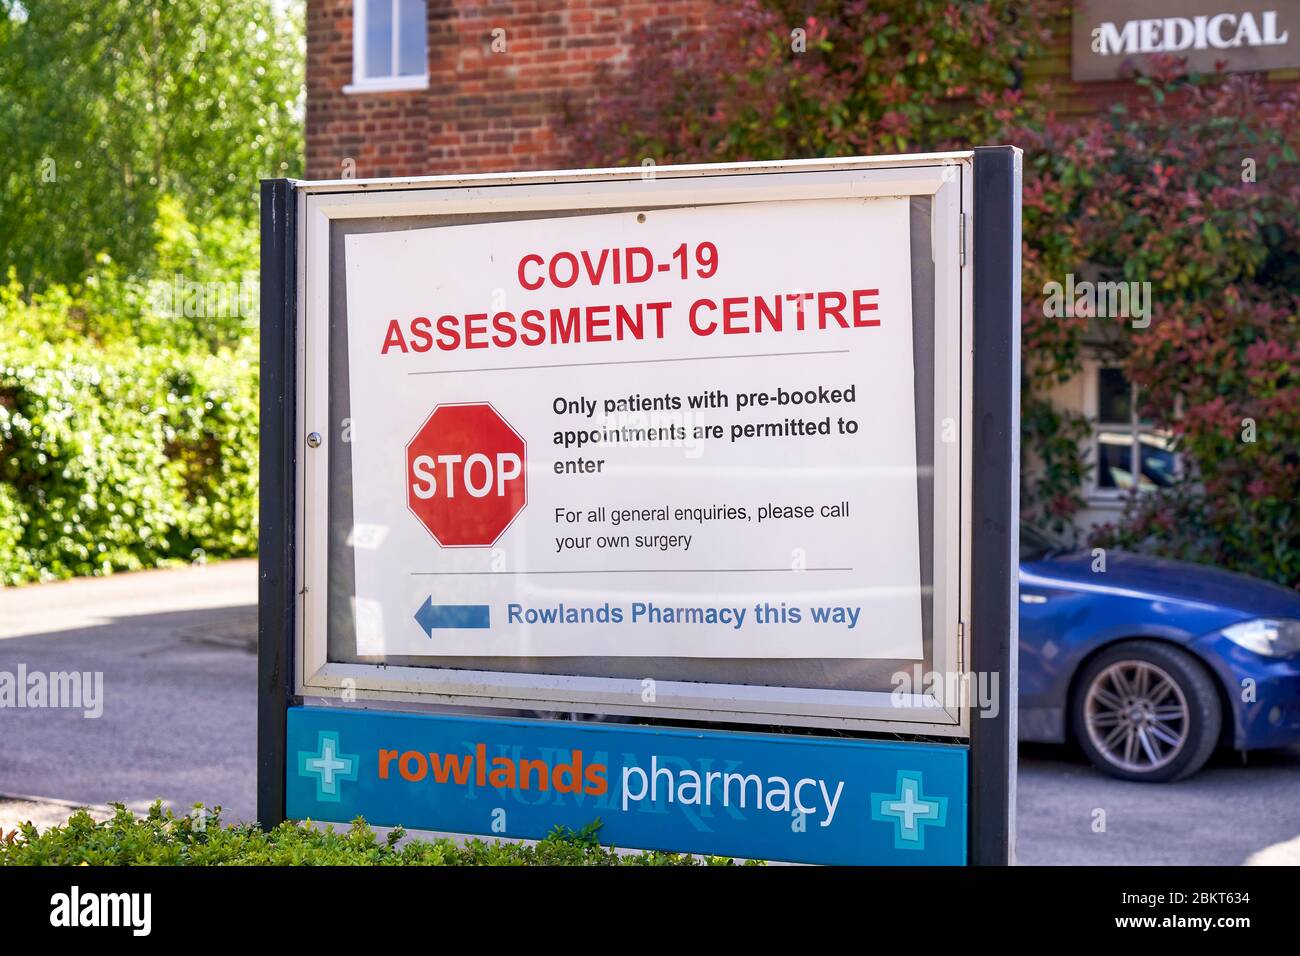 Covid-19 assessment centre sign Stock Photo